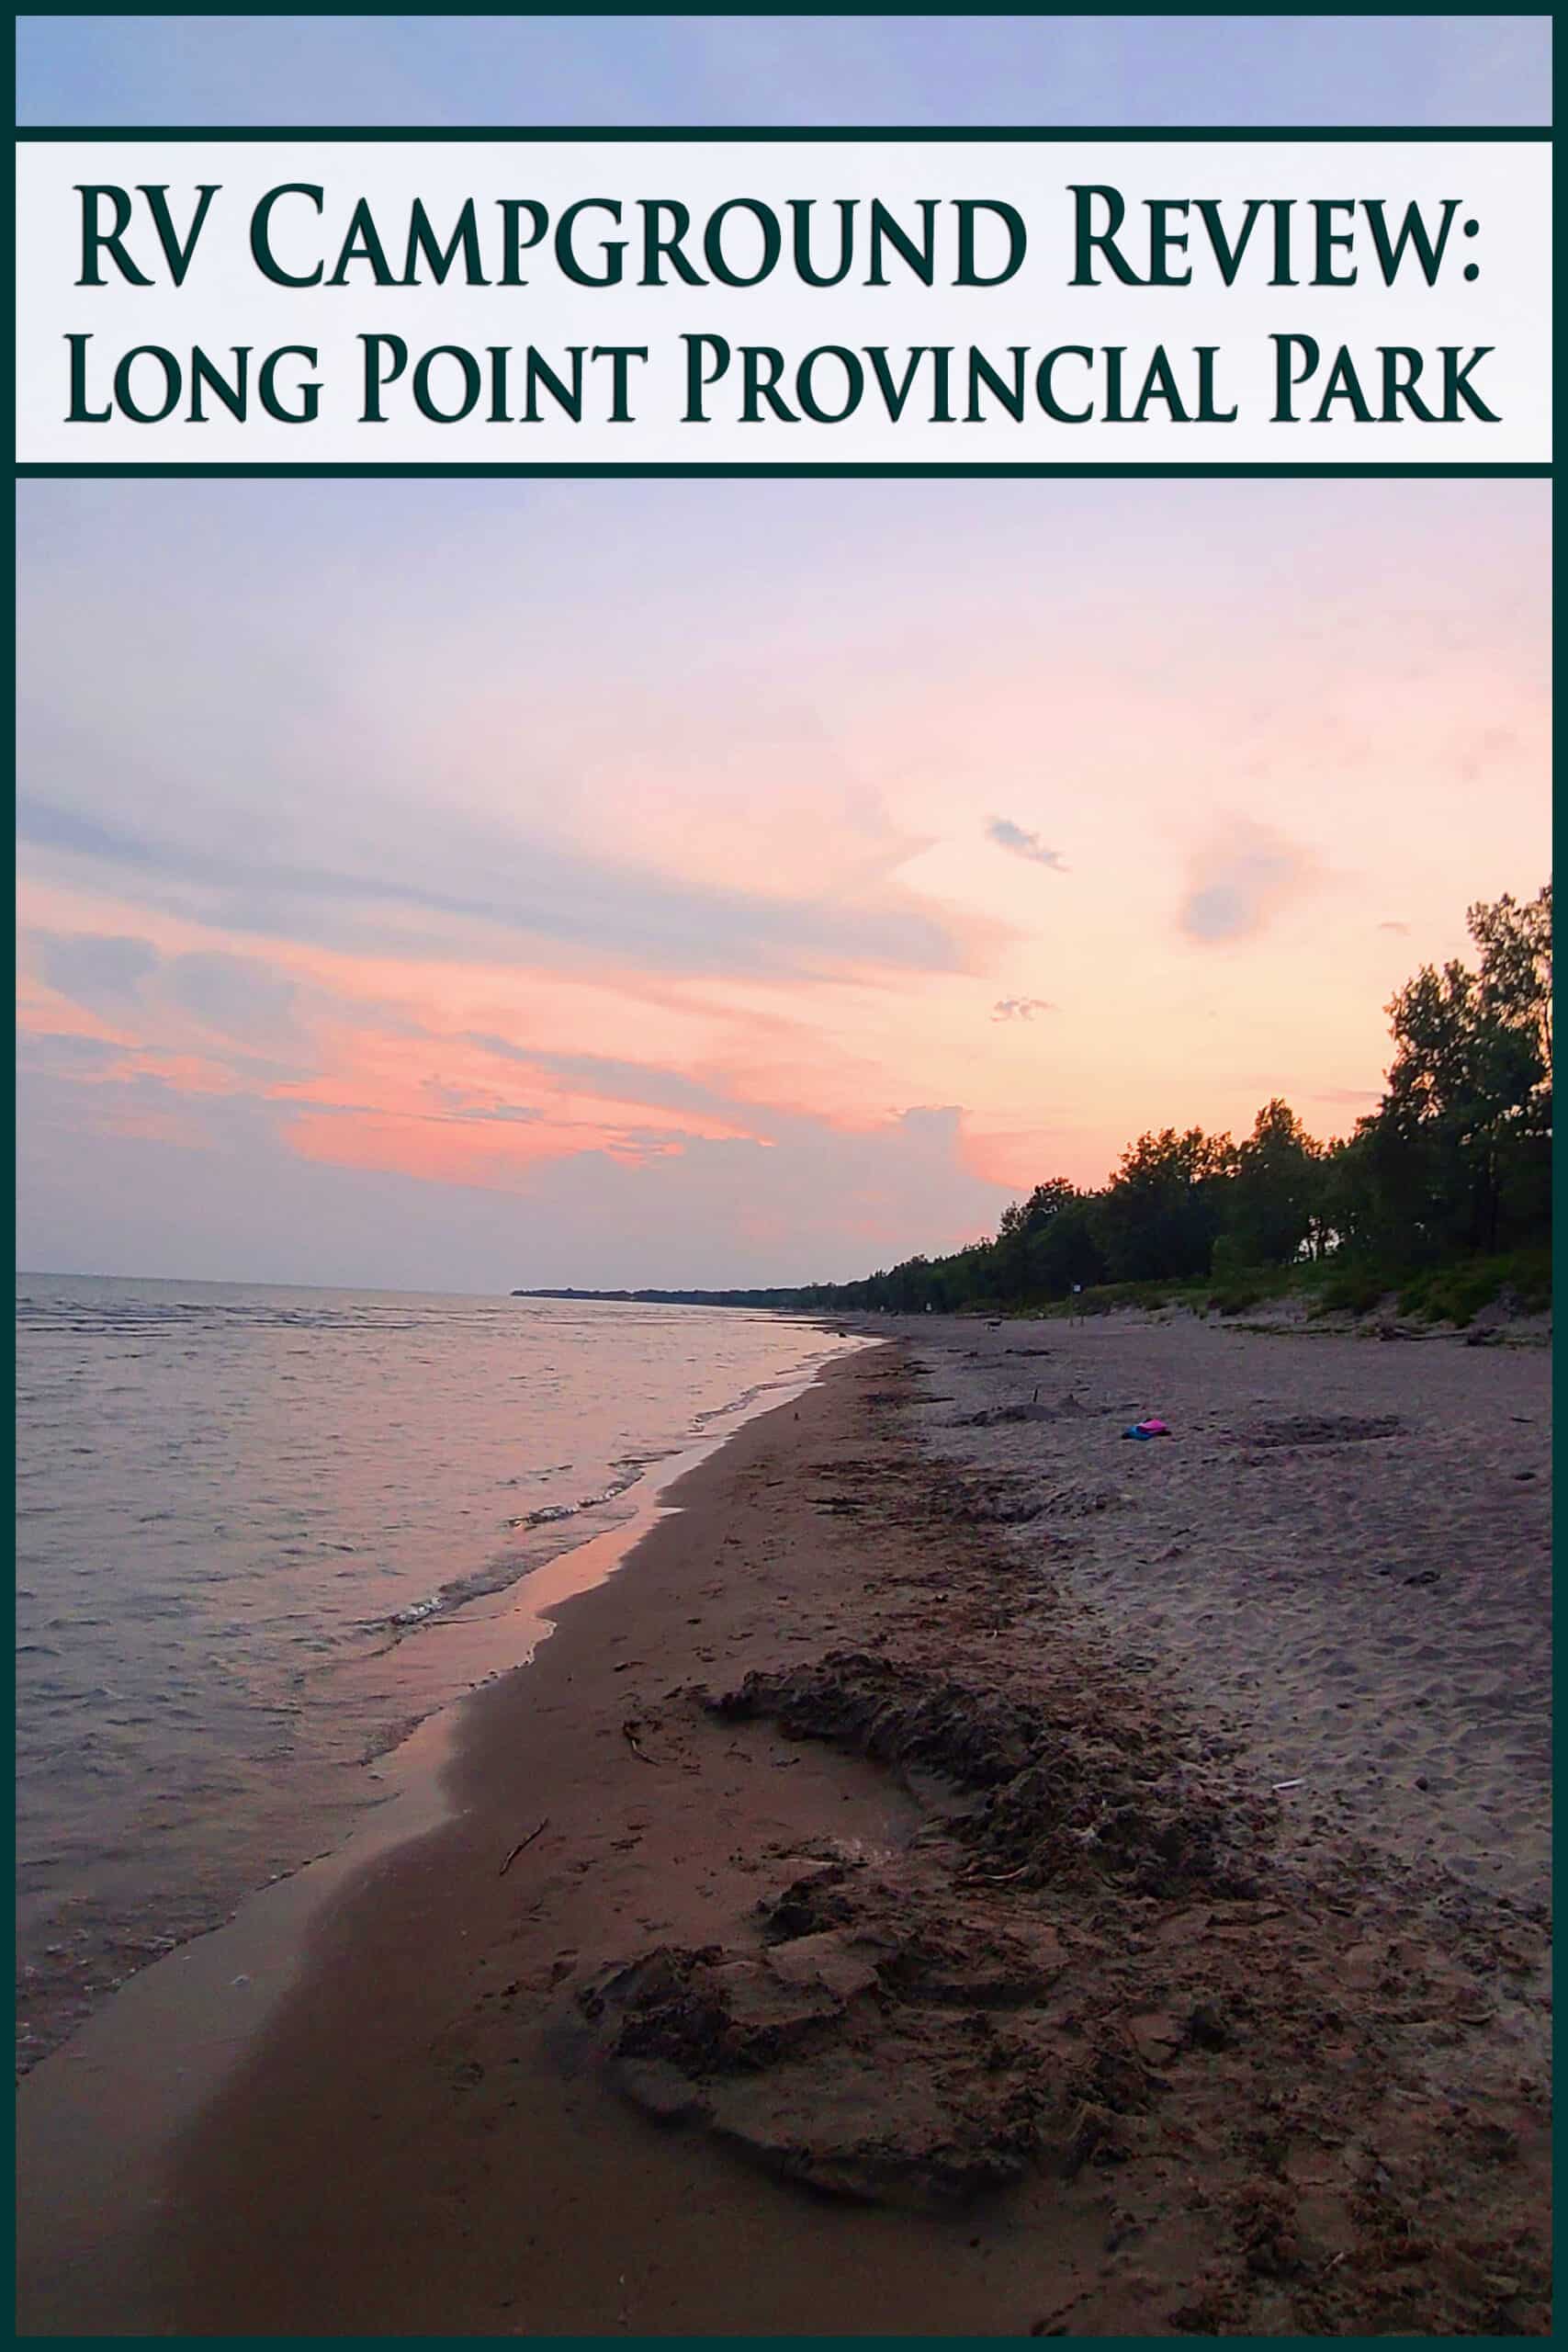 The sun setting over lake erie. Overlaid text says rv campground review long point provincial park.